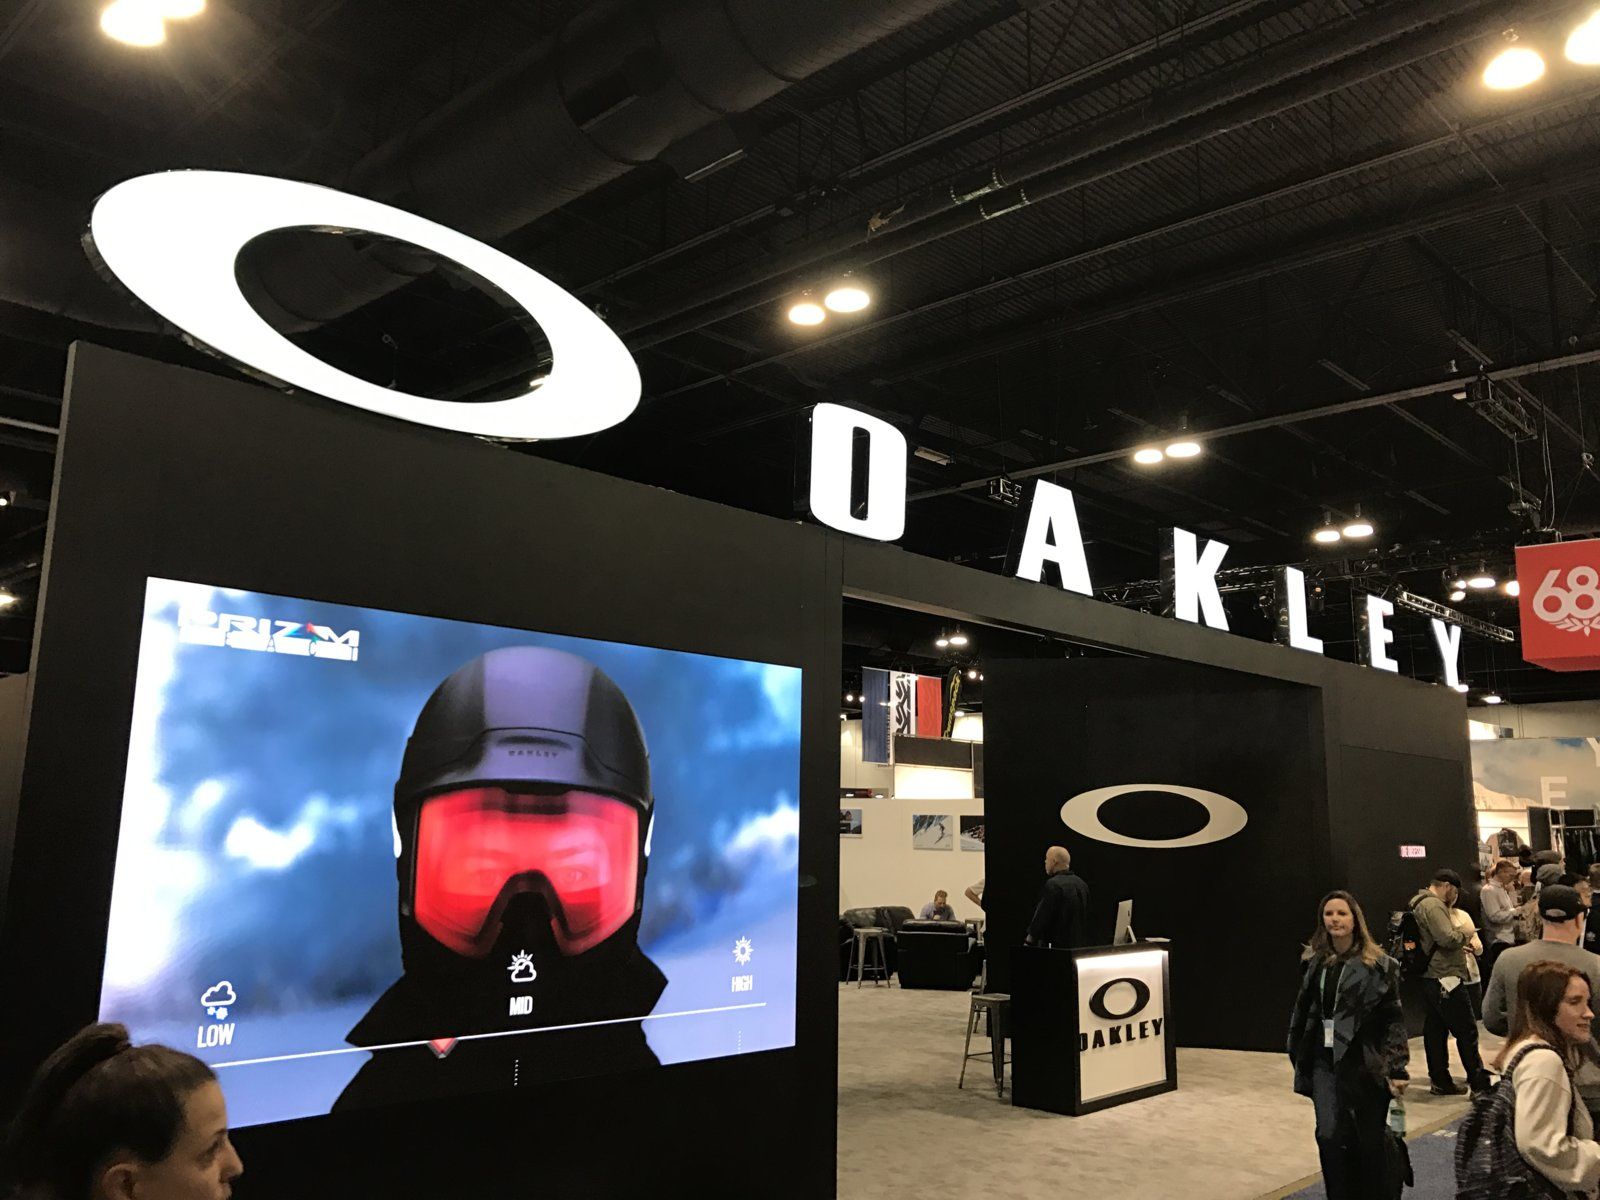 Oakley Prizm React - The future of goggle technology